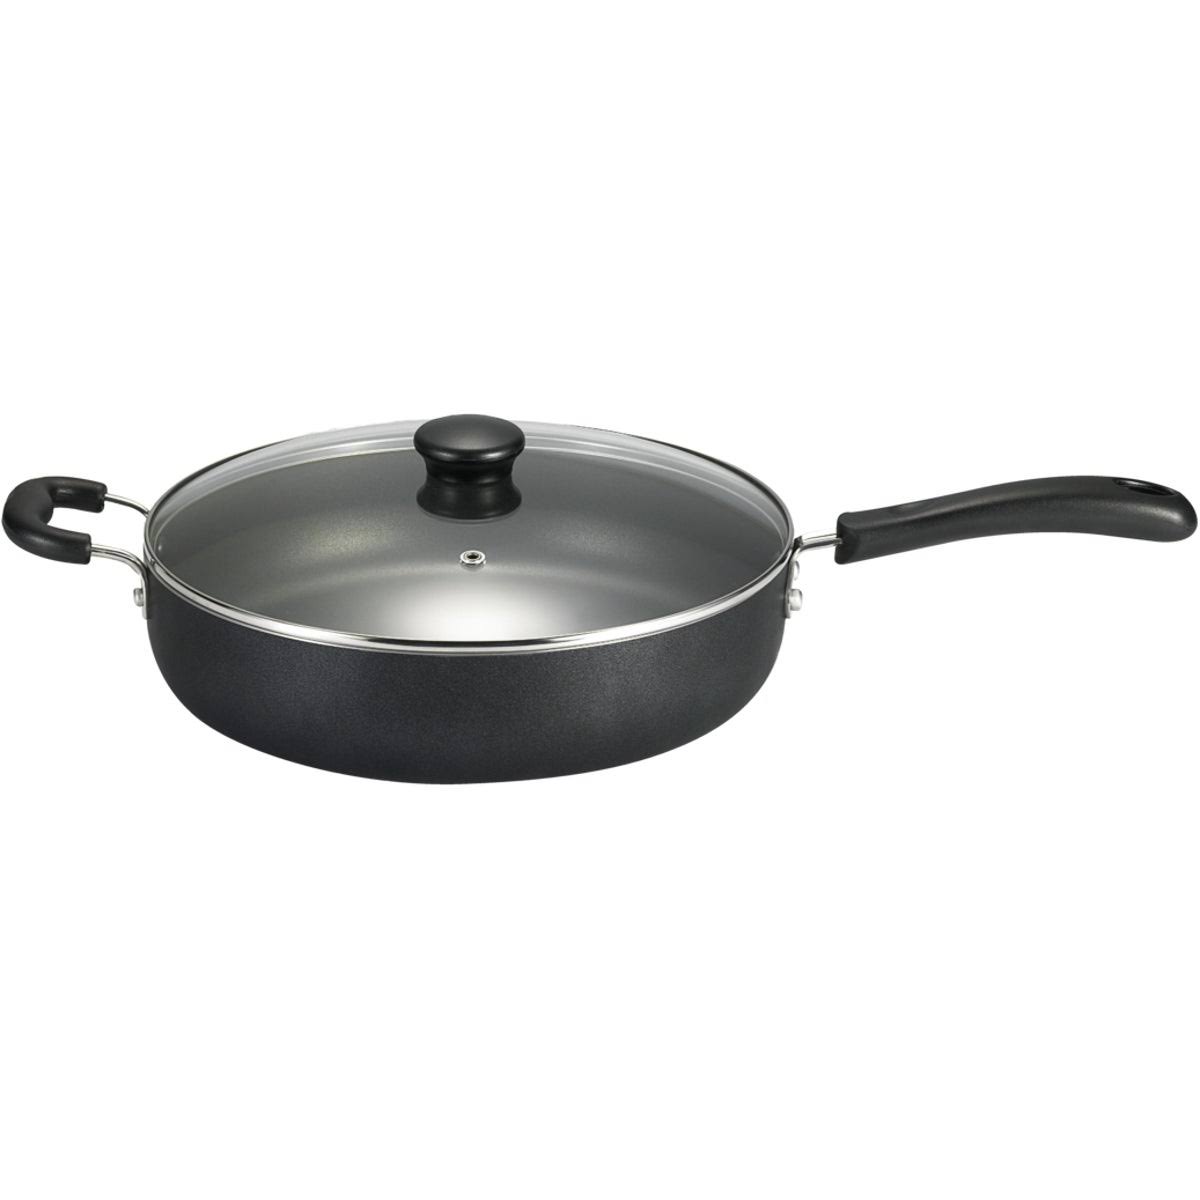 Total Jumbo Cooker with Lid - 5qt, Non-Stick